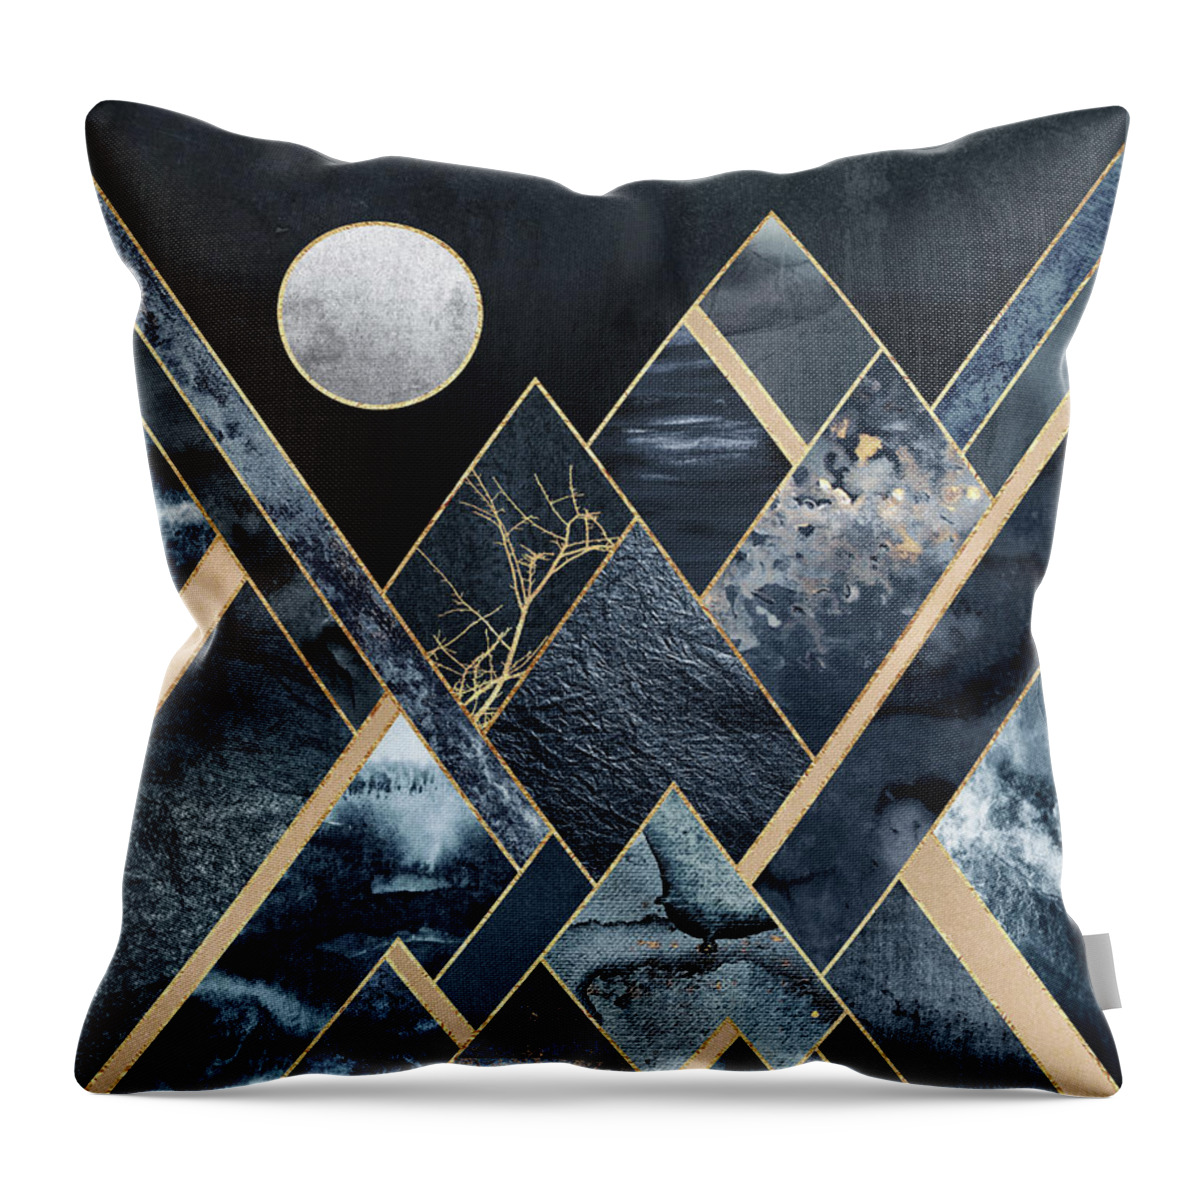 Graphic Throw Pillow featuring the digital art Stormy Mountains by Elisabeth Fredriksson